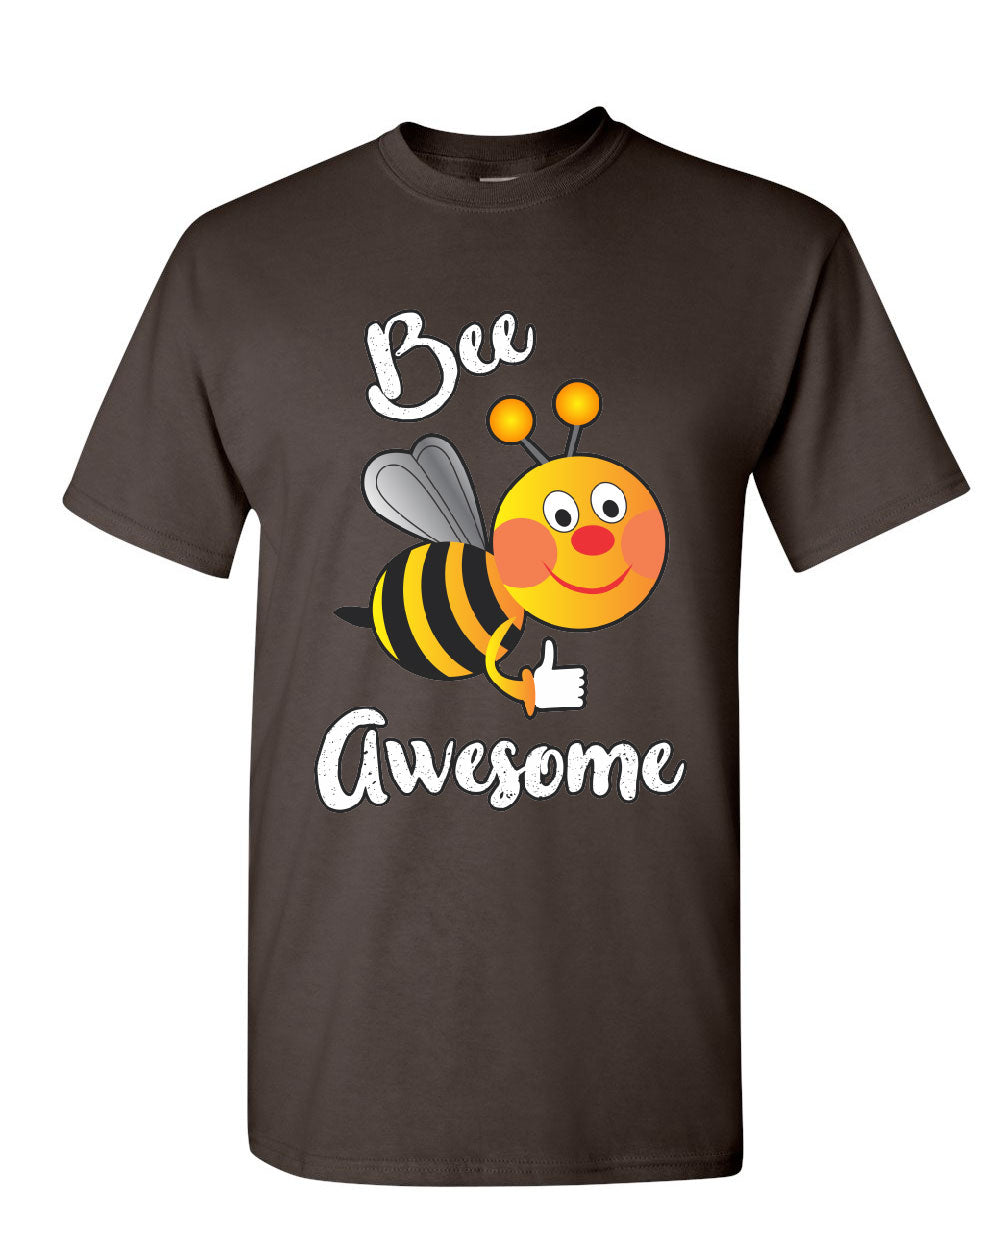 Bee Awesome T-Shirt Motivational Funny Cute Honey Bee Be Awesome Mens Tee Shirt |